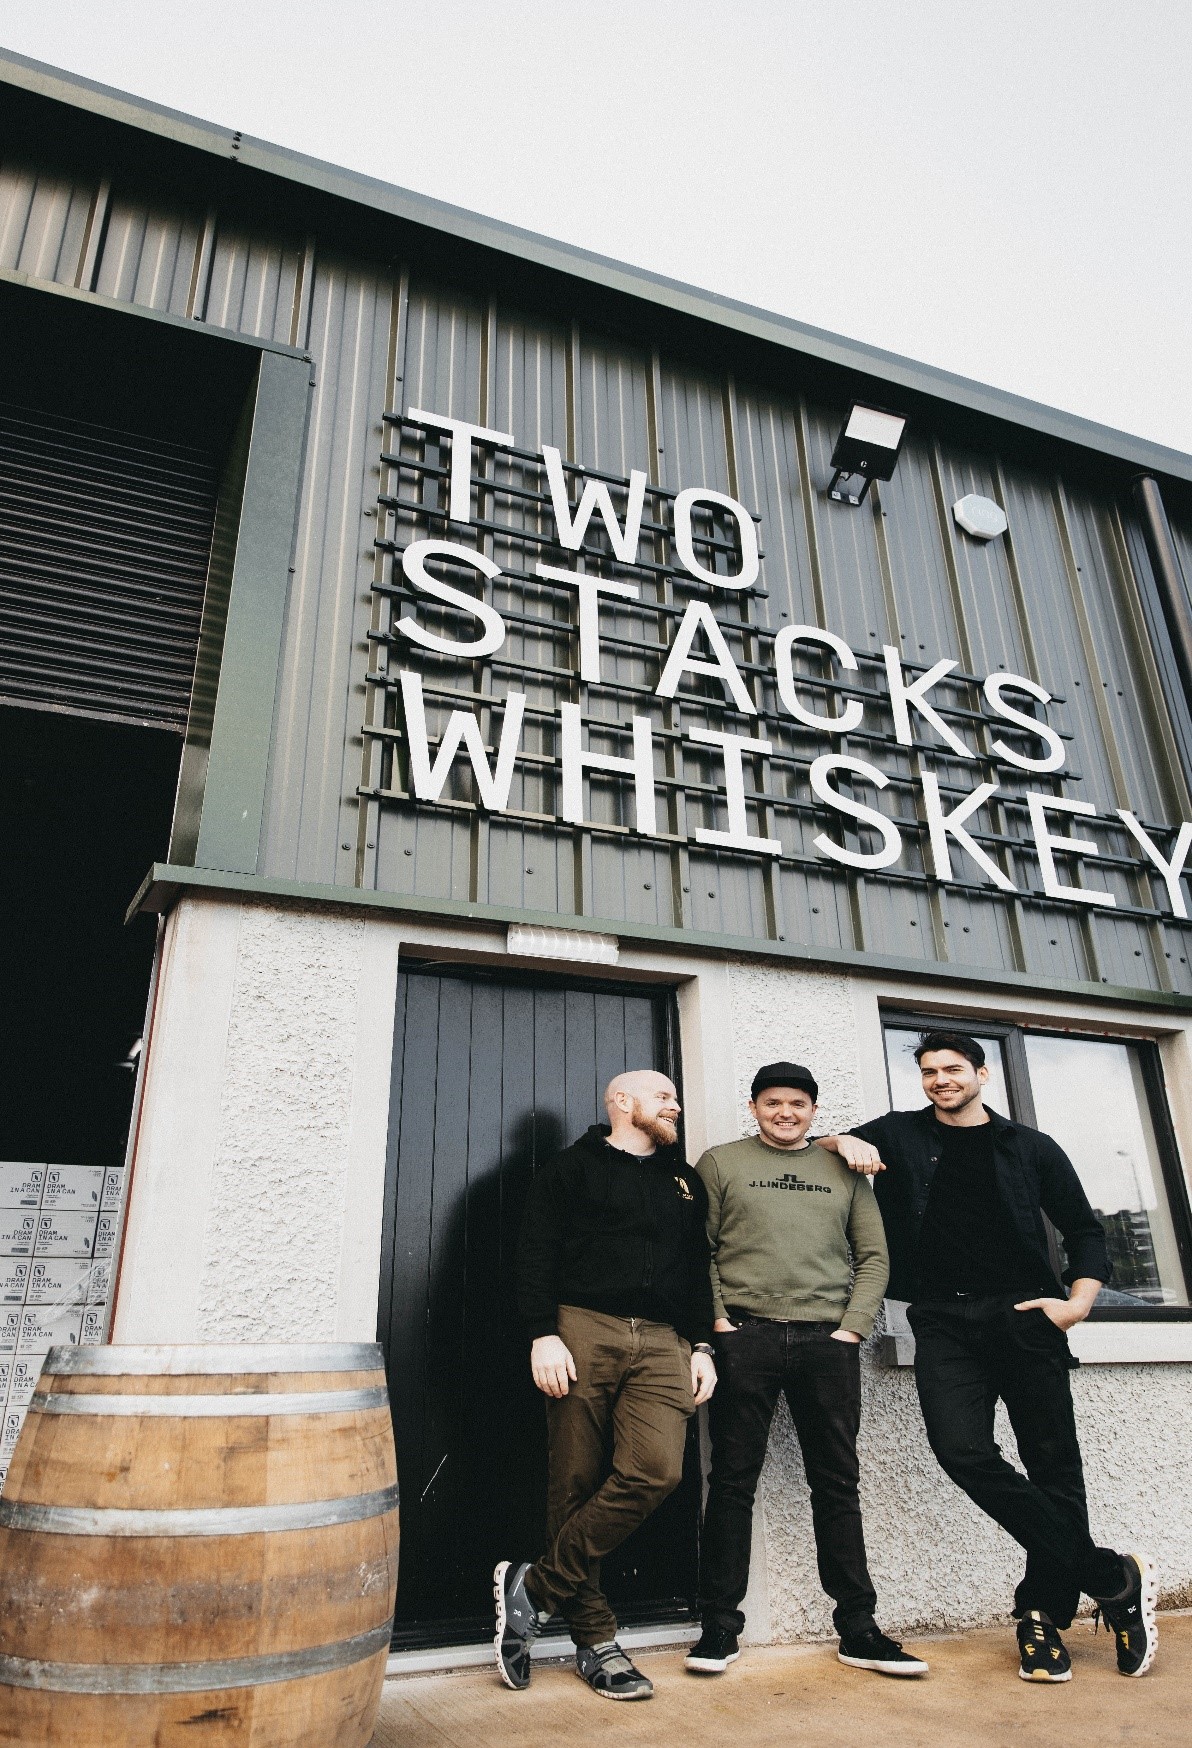 Two Stacks Irish Whiskey: A Global Success Story Defying the Odds